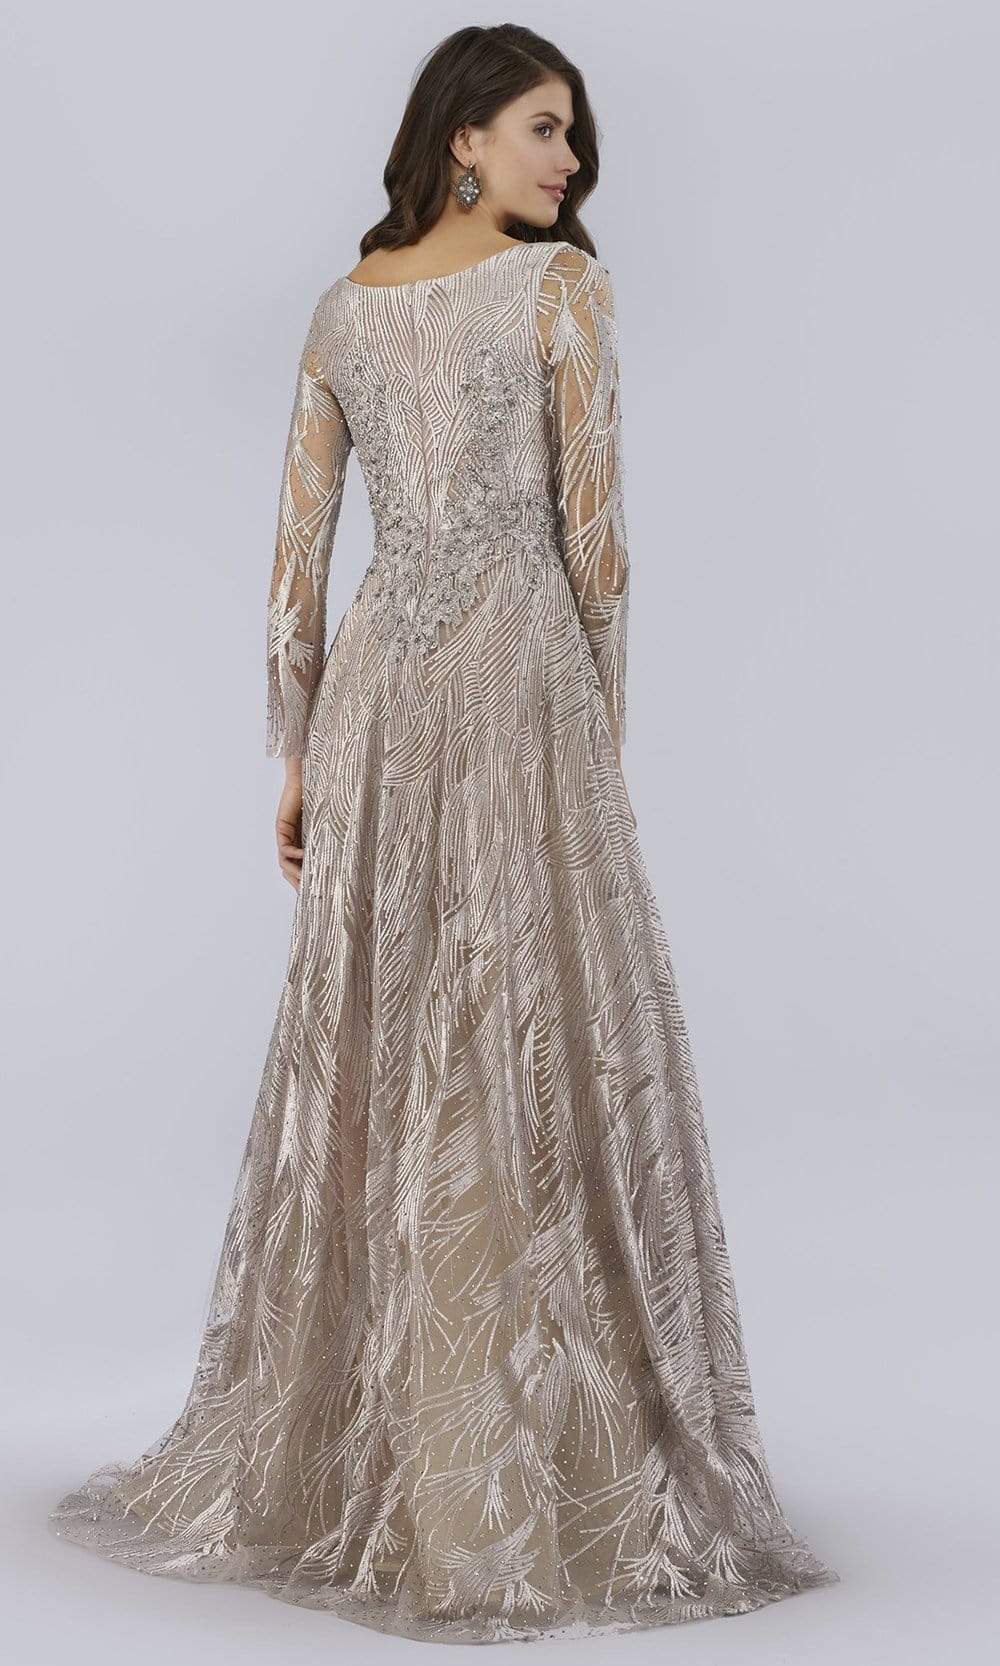 Lara Dresses - 29753 V Neck Long Sleeves Beaded Embroidered Gown Mother of the Bride Dresses